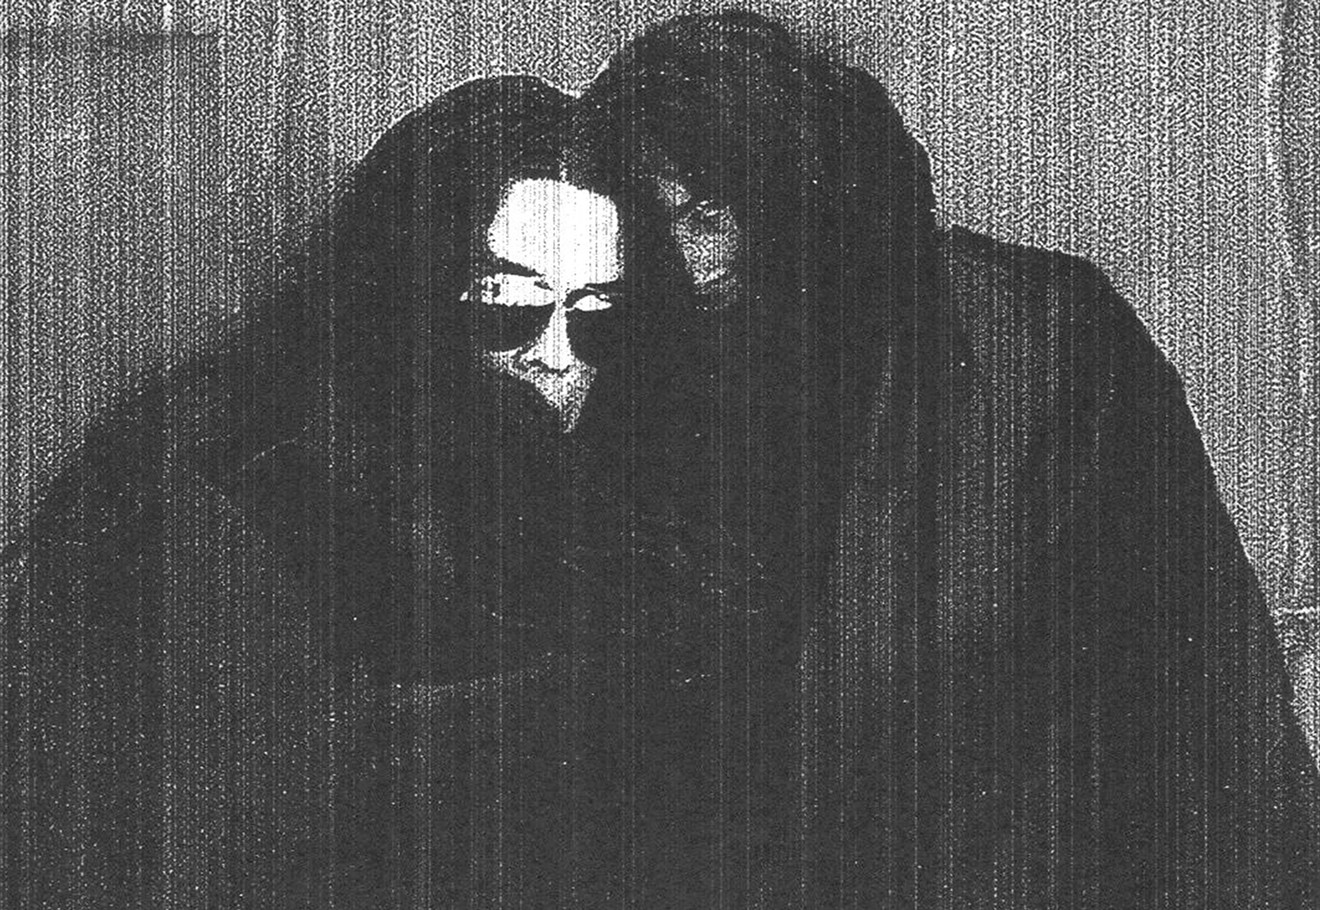 Sunn O))) makes drone metal. It's as eerie as it sounds.